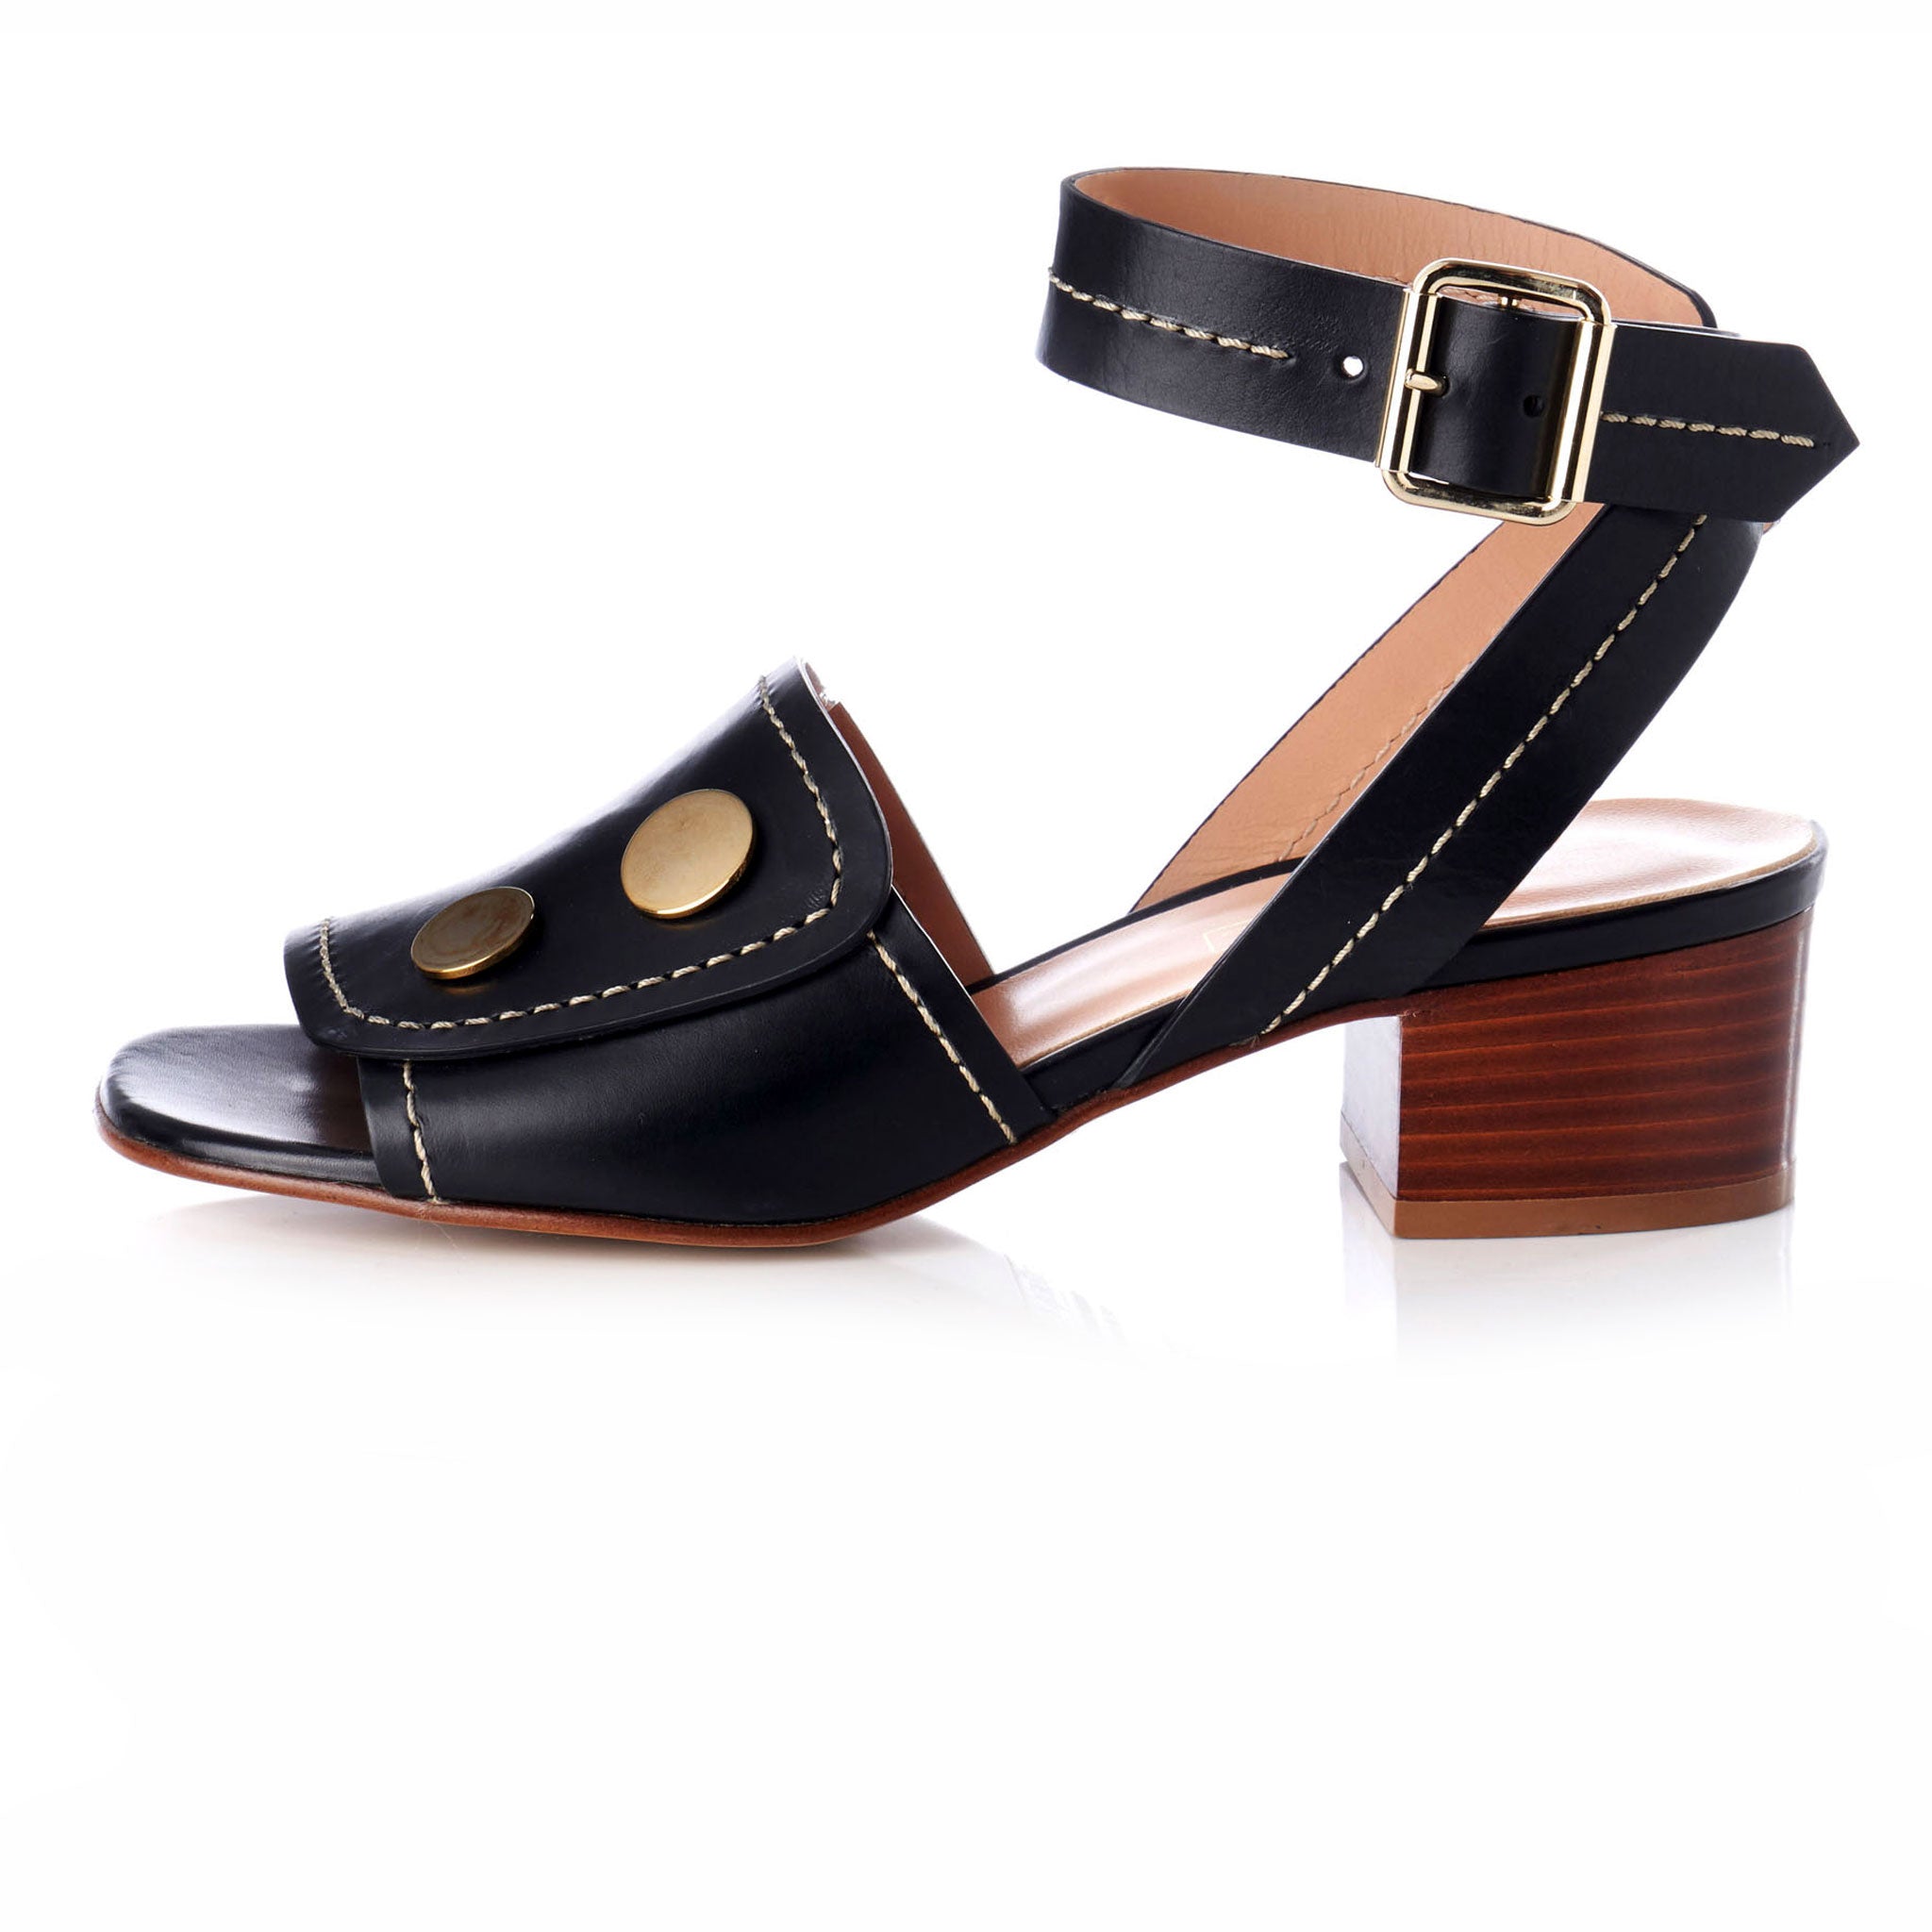 black open toe fully covered vamp sandals with two inch heel and wide band crossover ankle strap 